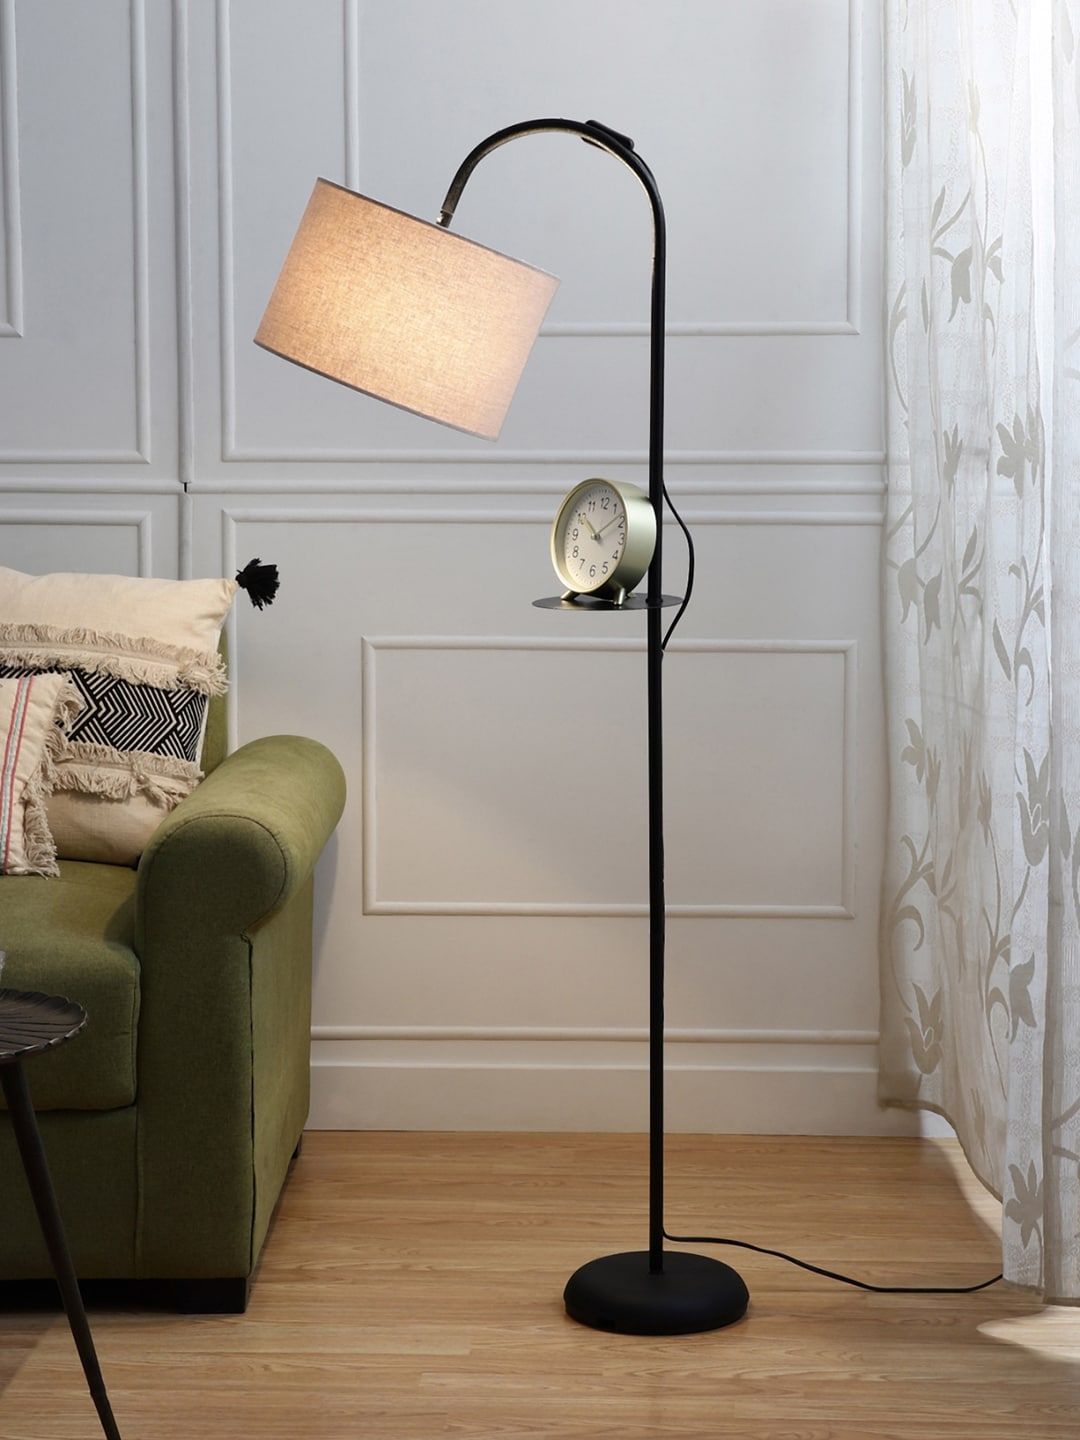 SANDED EDGE White Arc Floor Lamp with One Shelf Price in India